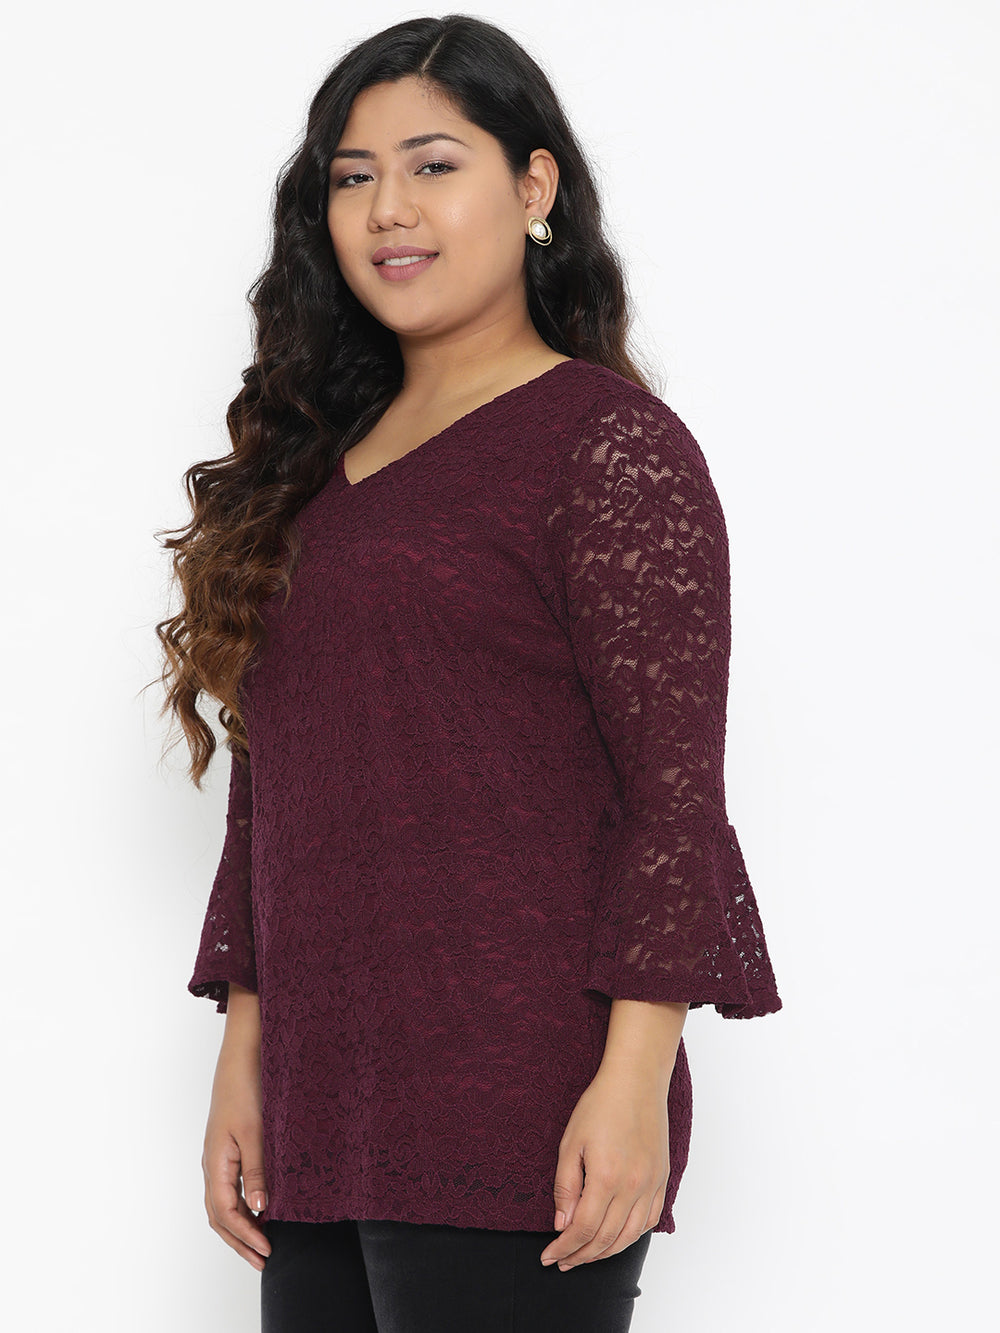 BURGUNDY LACE TOP